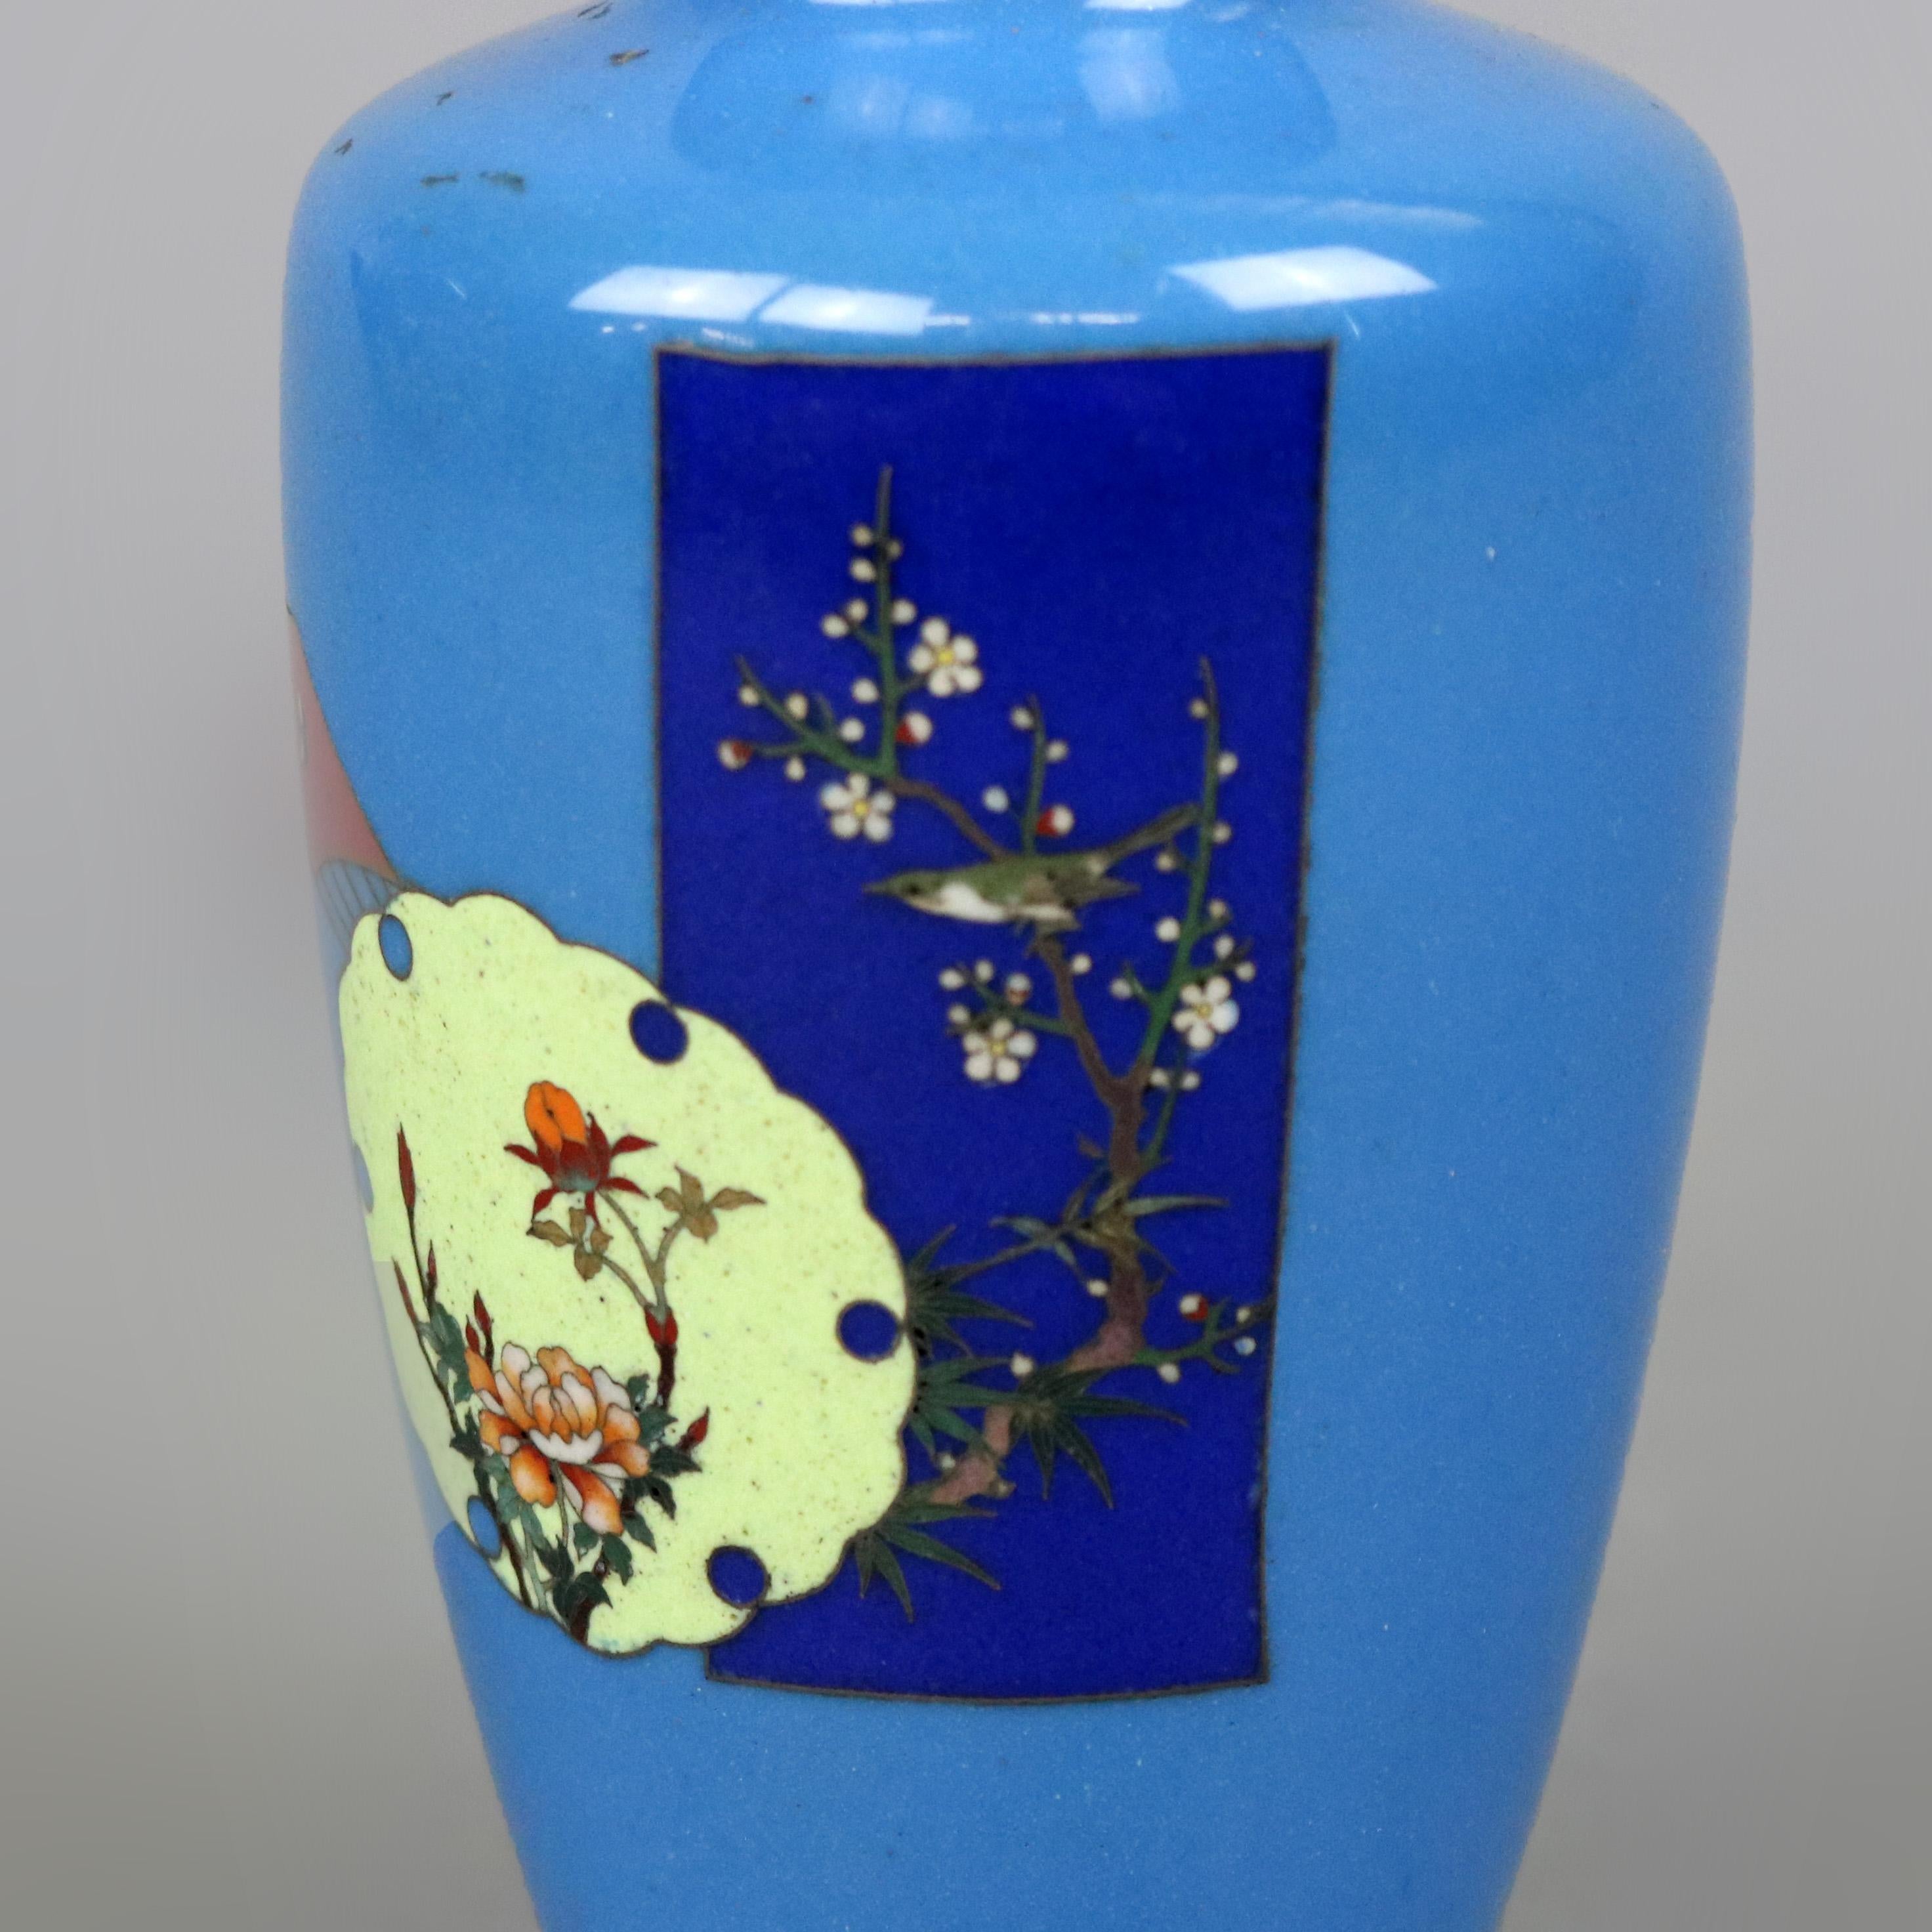 An antique Japanese aesthetic movement cabinet vase offers cloisonné enamel decoration with floral reserves, one having cherry blossom and bird, en verso crescent moon, circa 1870

Measures: 4.75